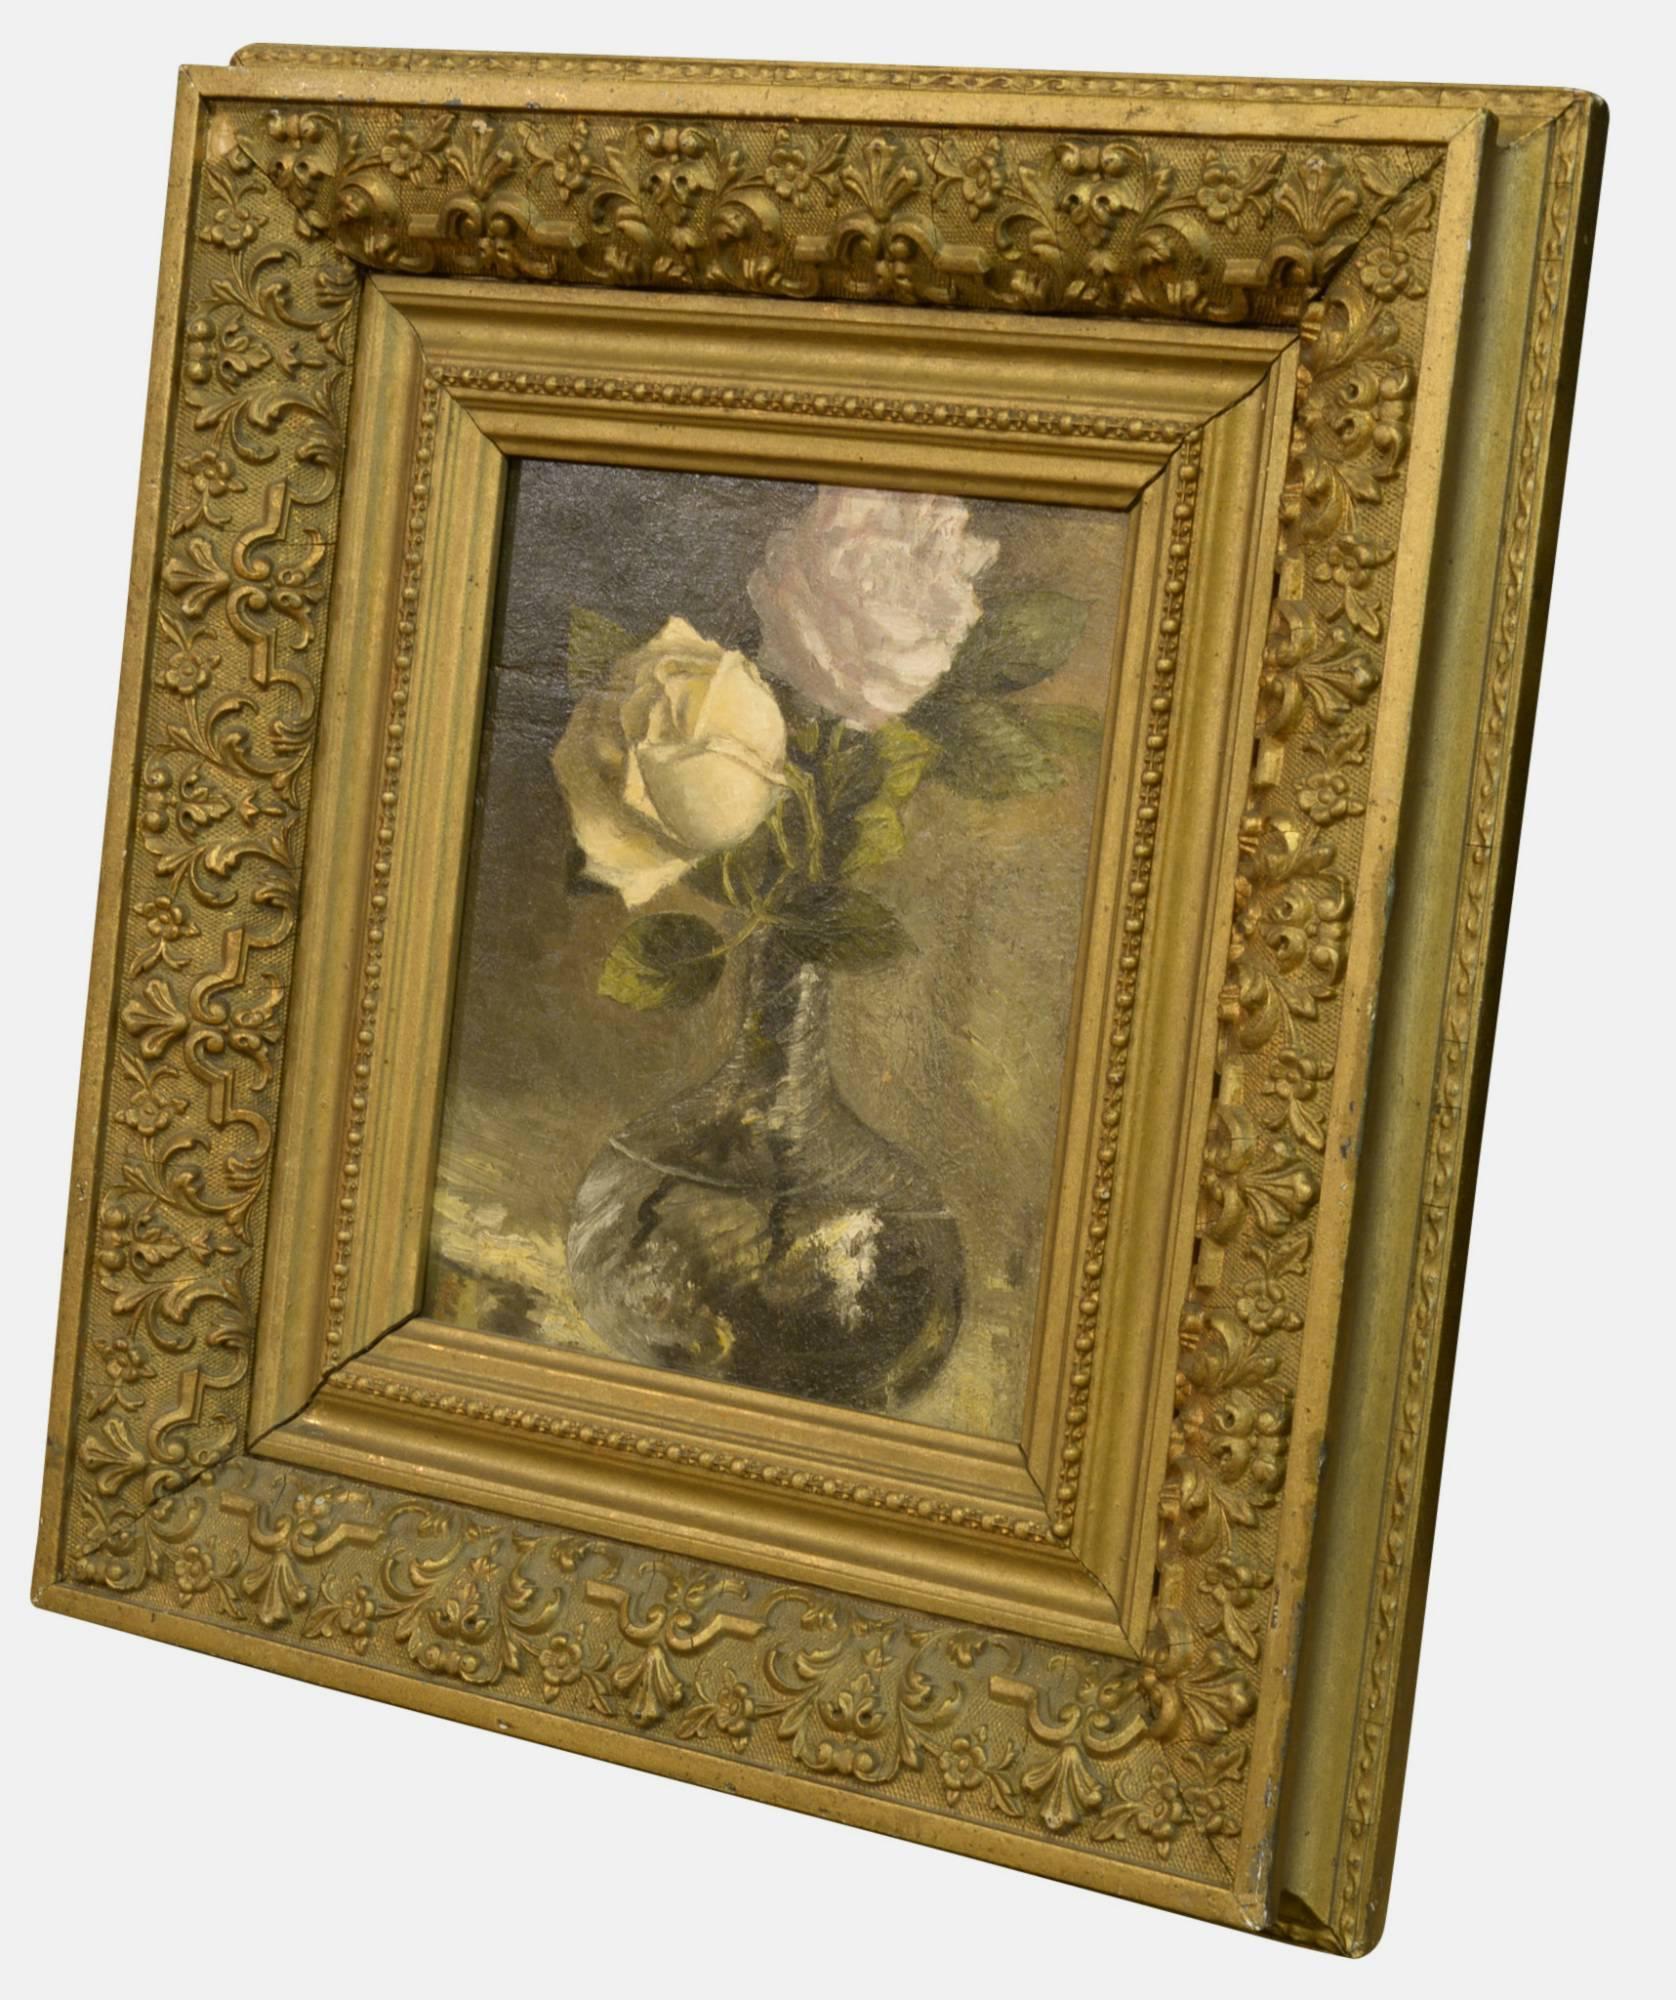 Oil on panel of roses in vase,

circa 1890.